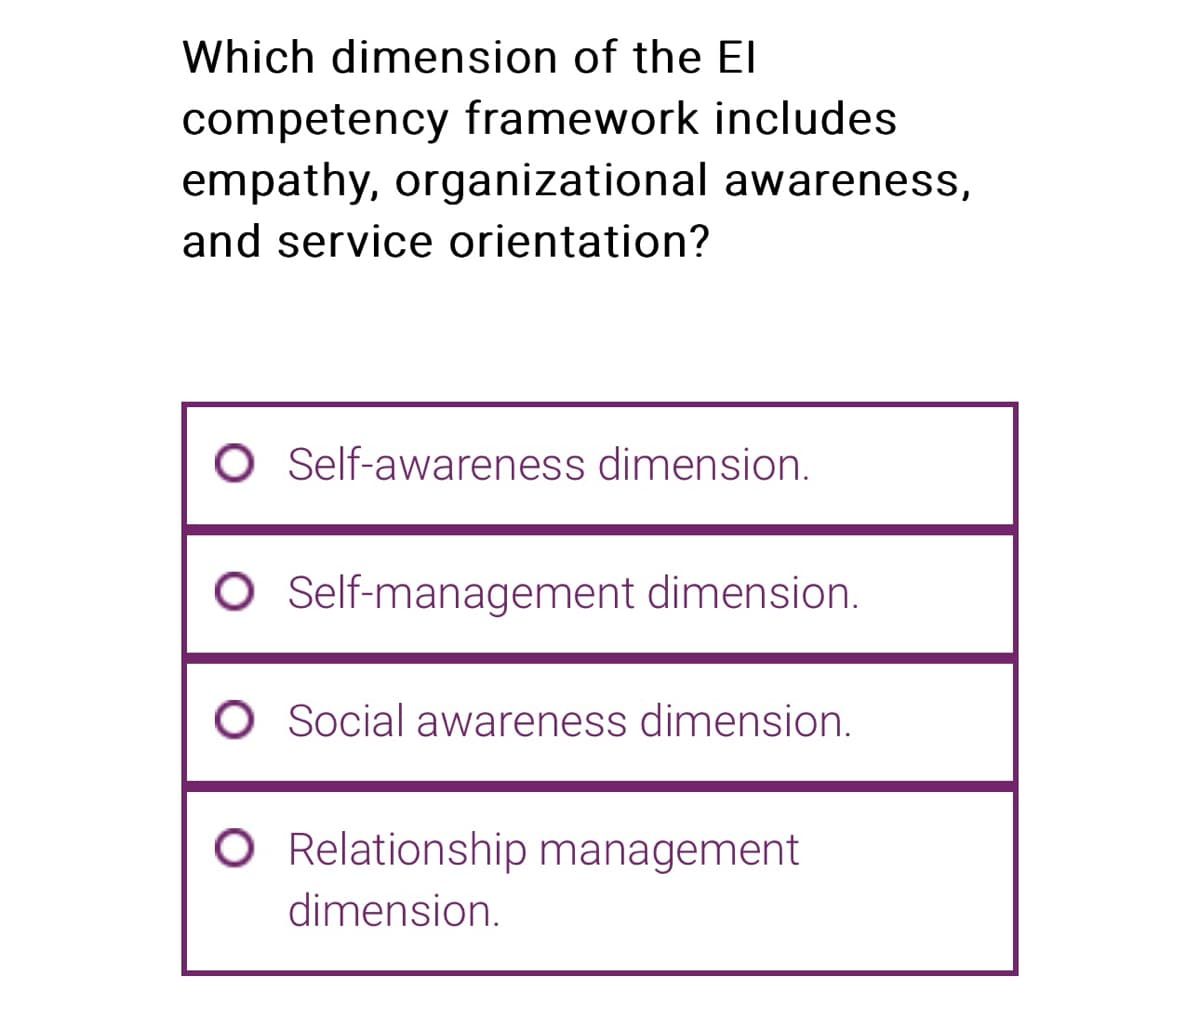 Which dimension of the El
competency framework includes
empathy, organizational awareness,
and service orientation?
O Self-awareness dimension.
O Self-management dimension.
O Social awareness dimension.
Relationship management
dimension.